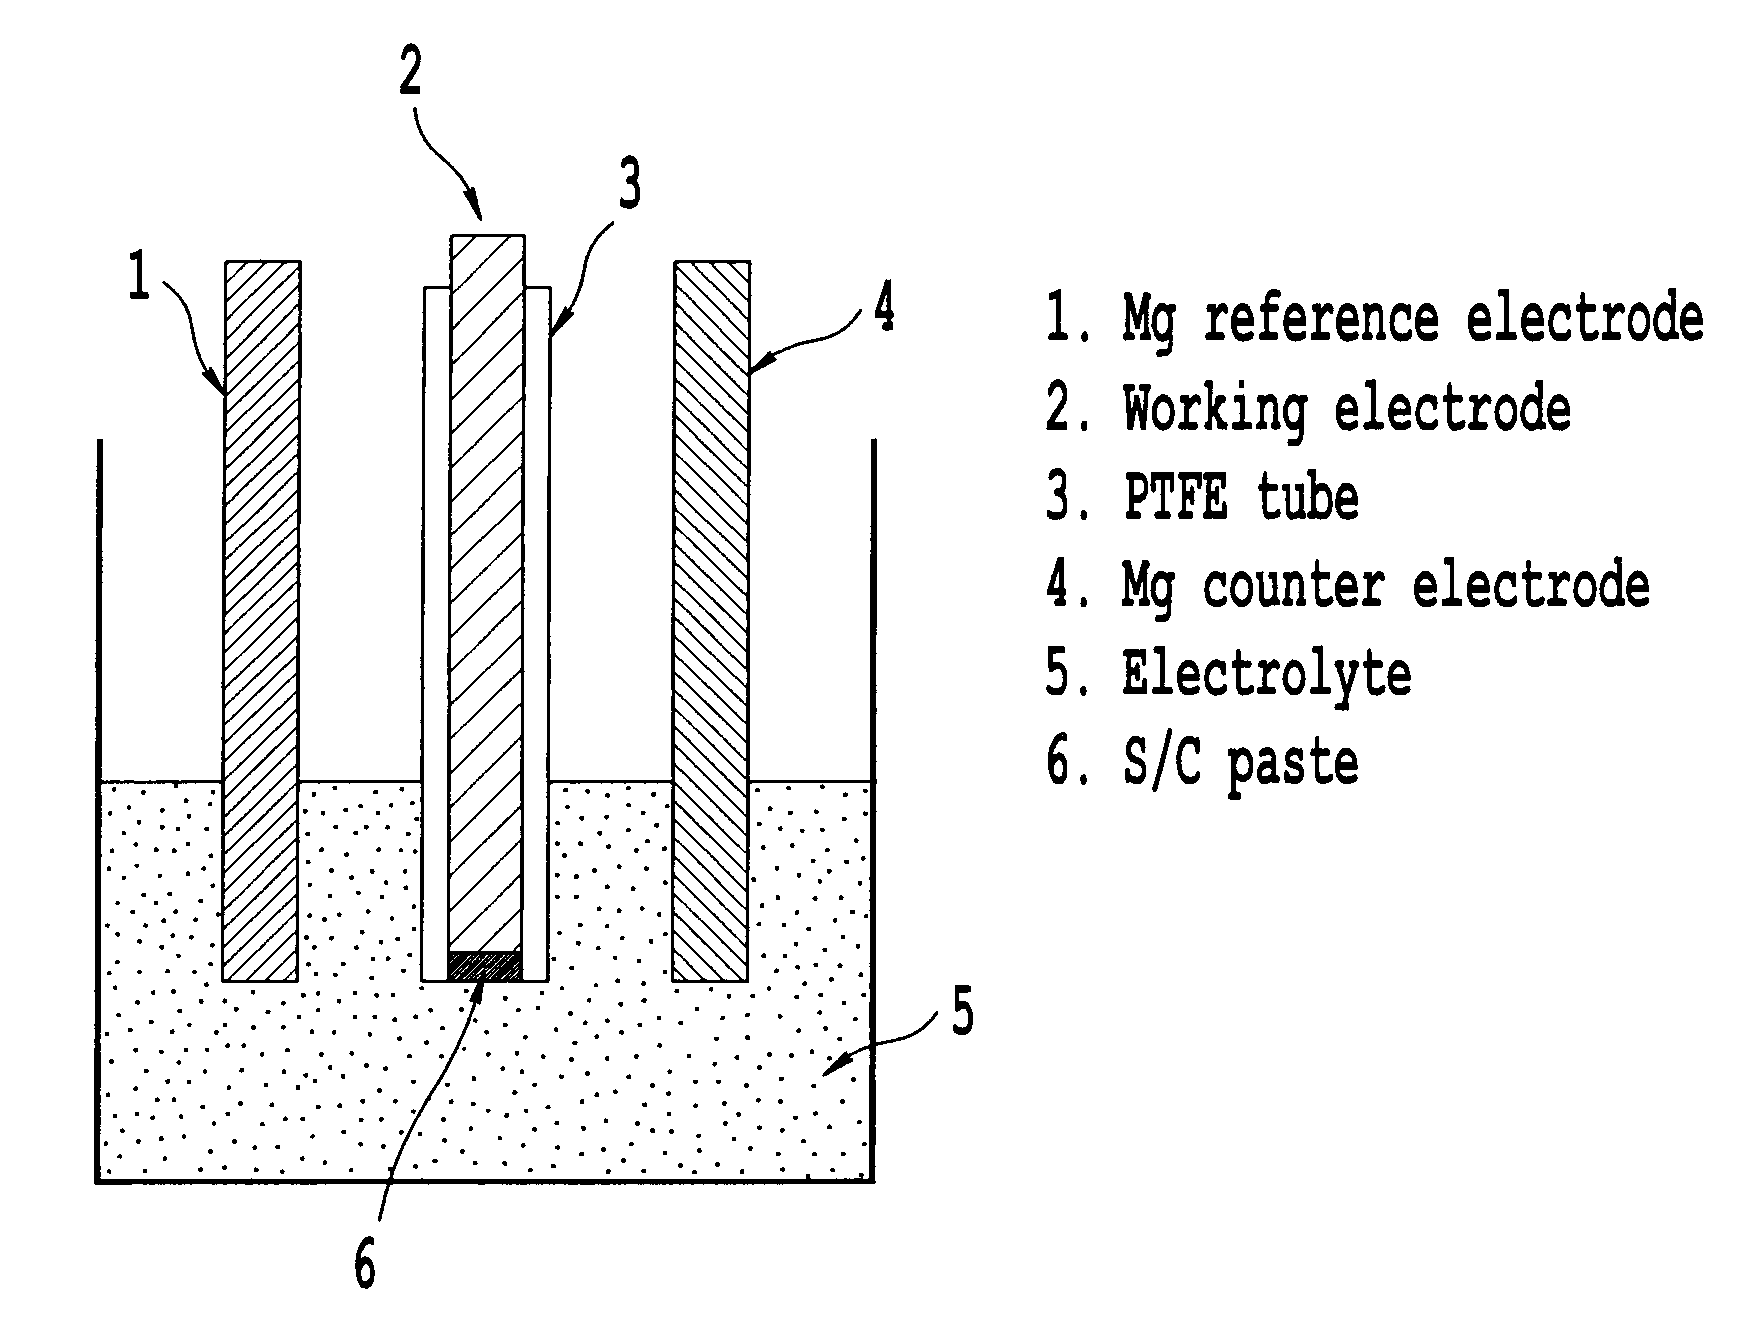 Electrolyte for a magnesium sulfur battery